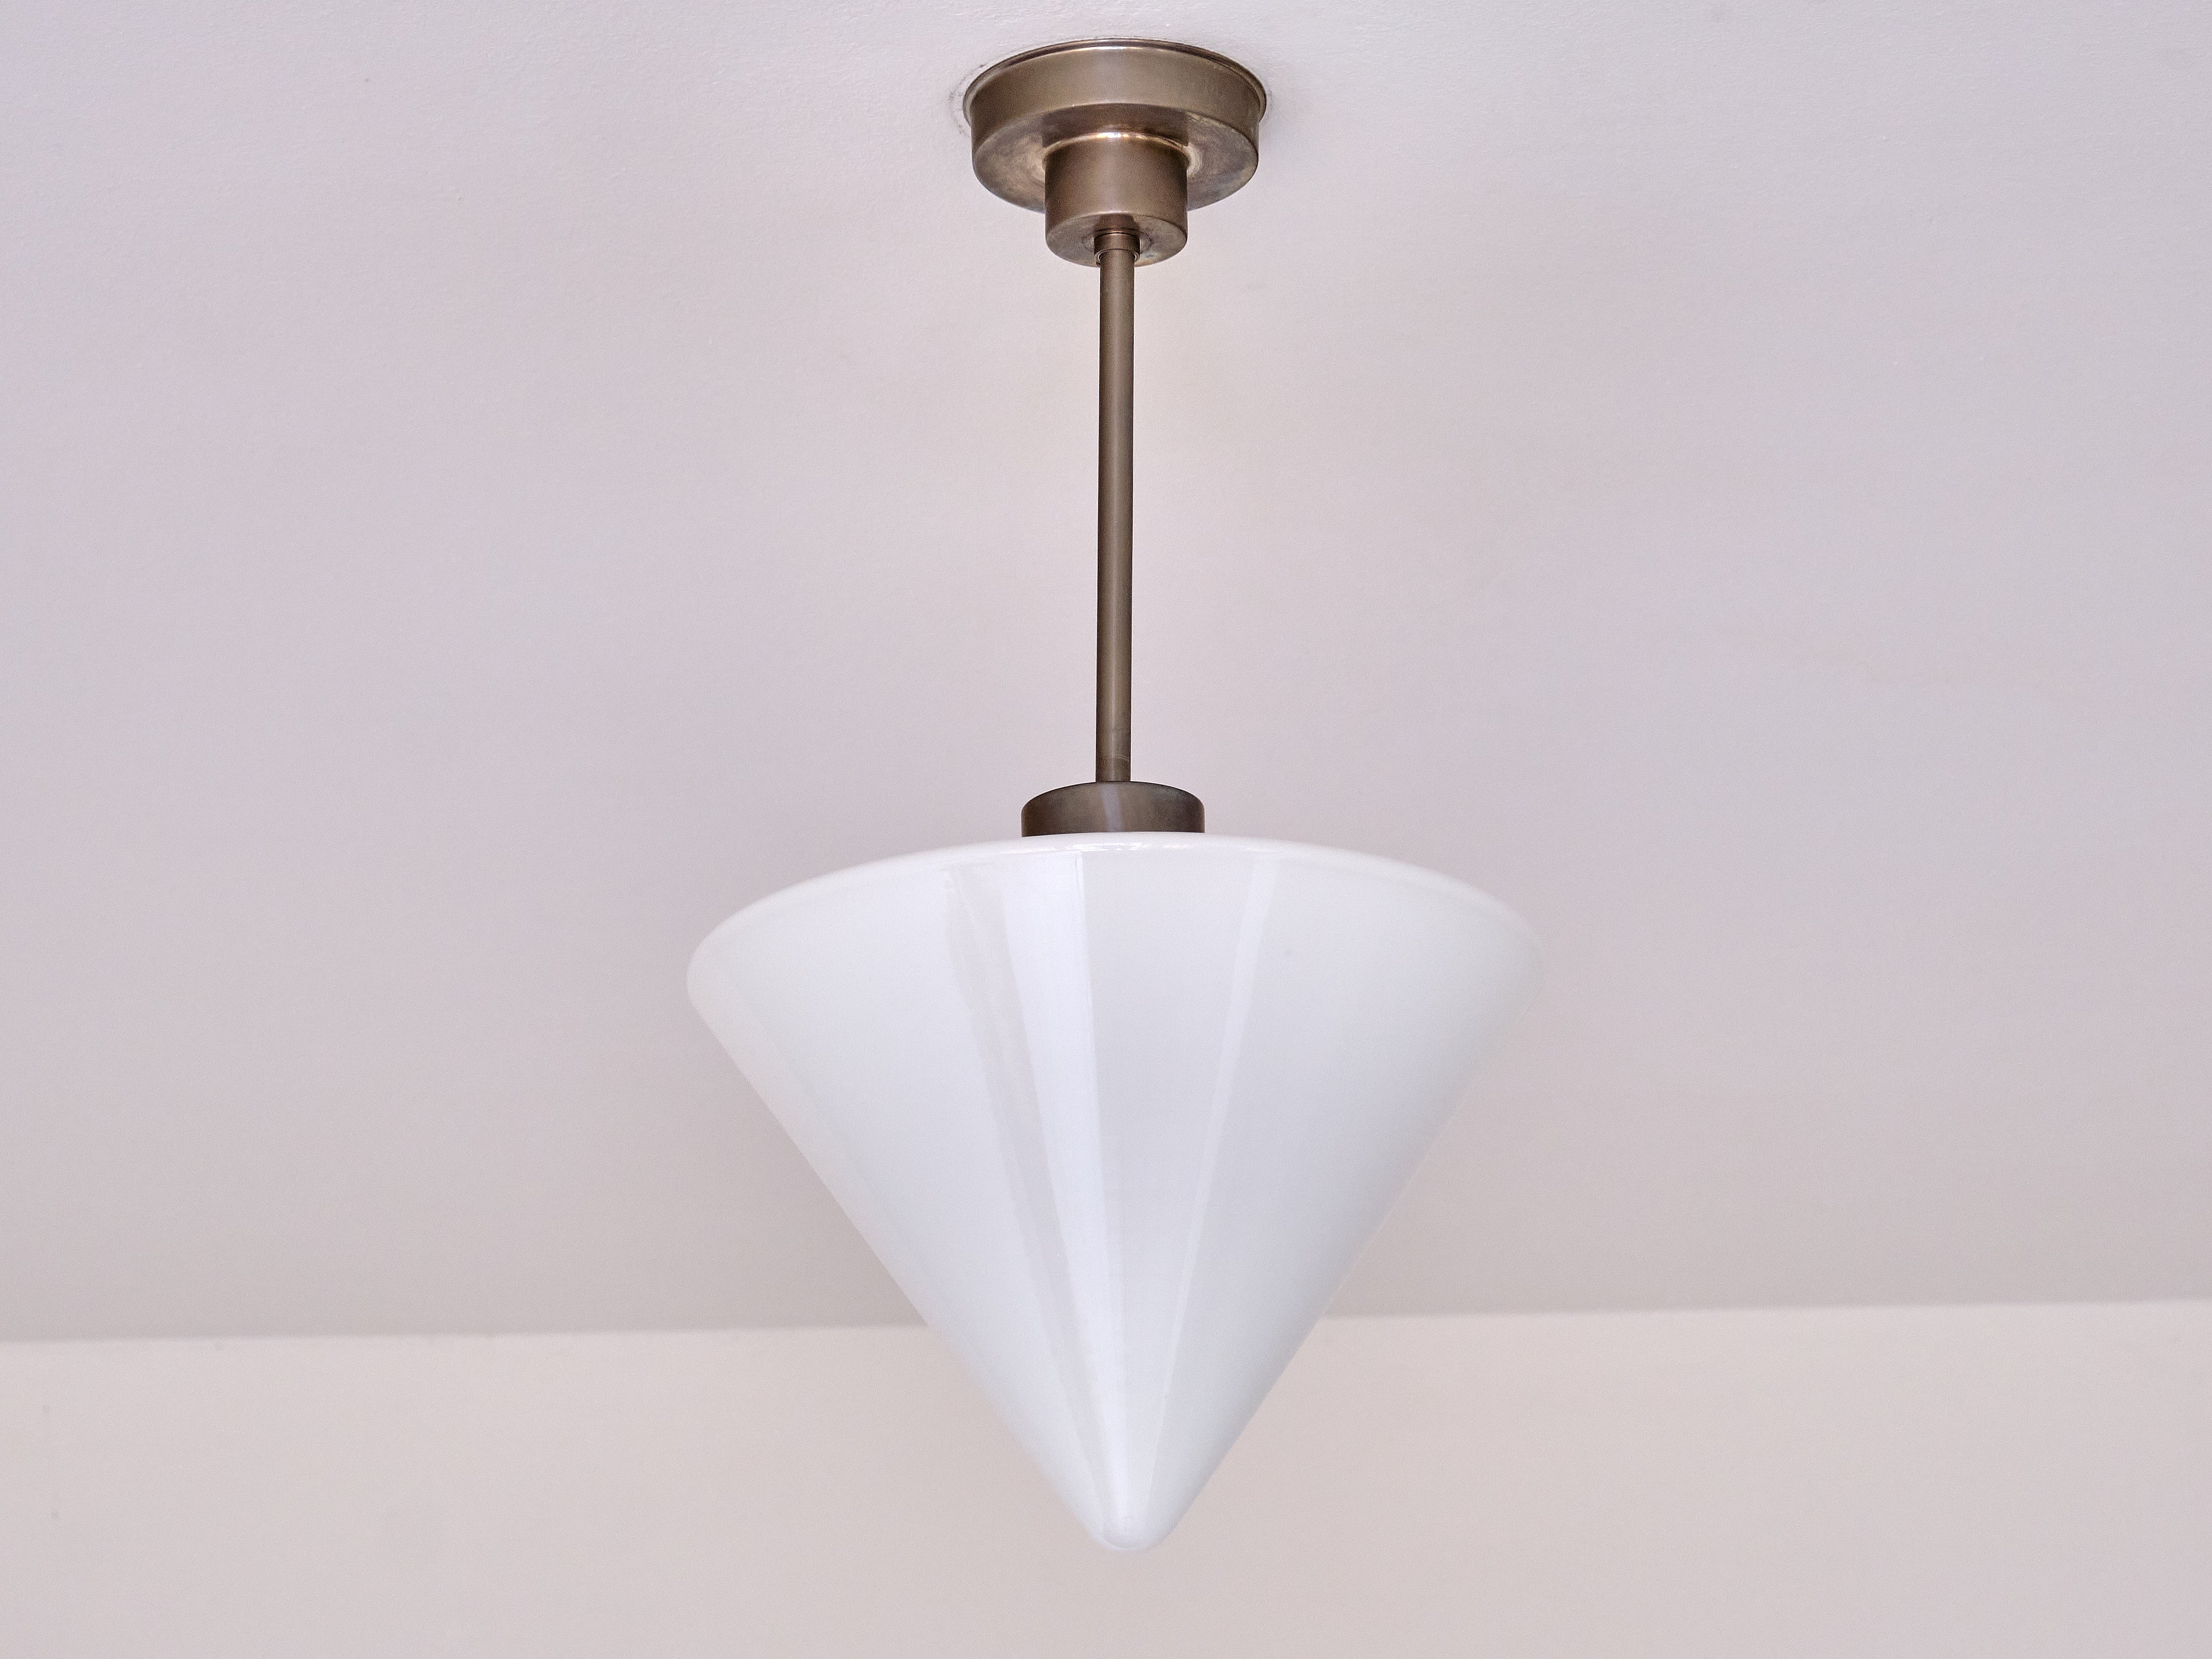 This rare pendant light was produced by Gispen in The Netherlands in the 1950s. The striking cone shaped shade is made of a slightly glossy, white opaline glass. The shade is attached to the two-tier fixture made in a matte nickel, with a beautiful